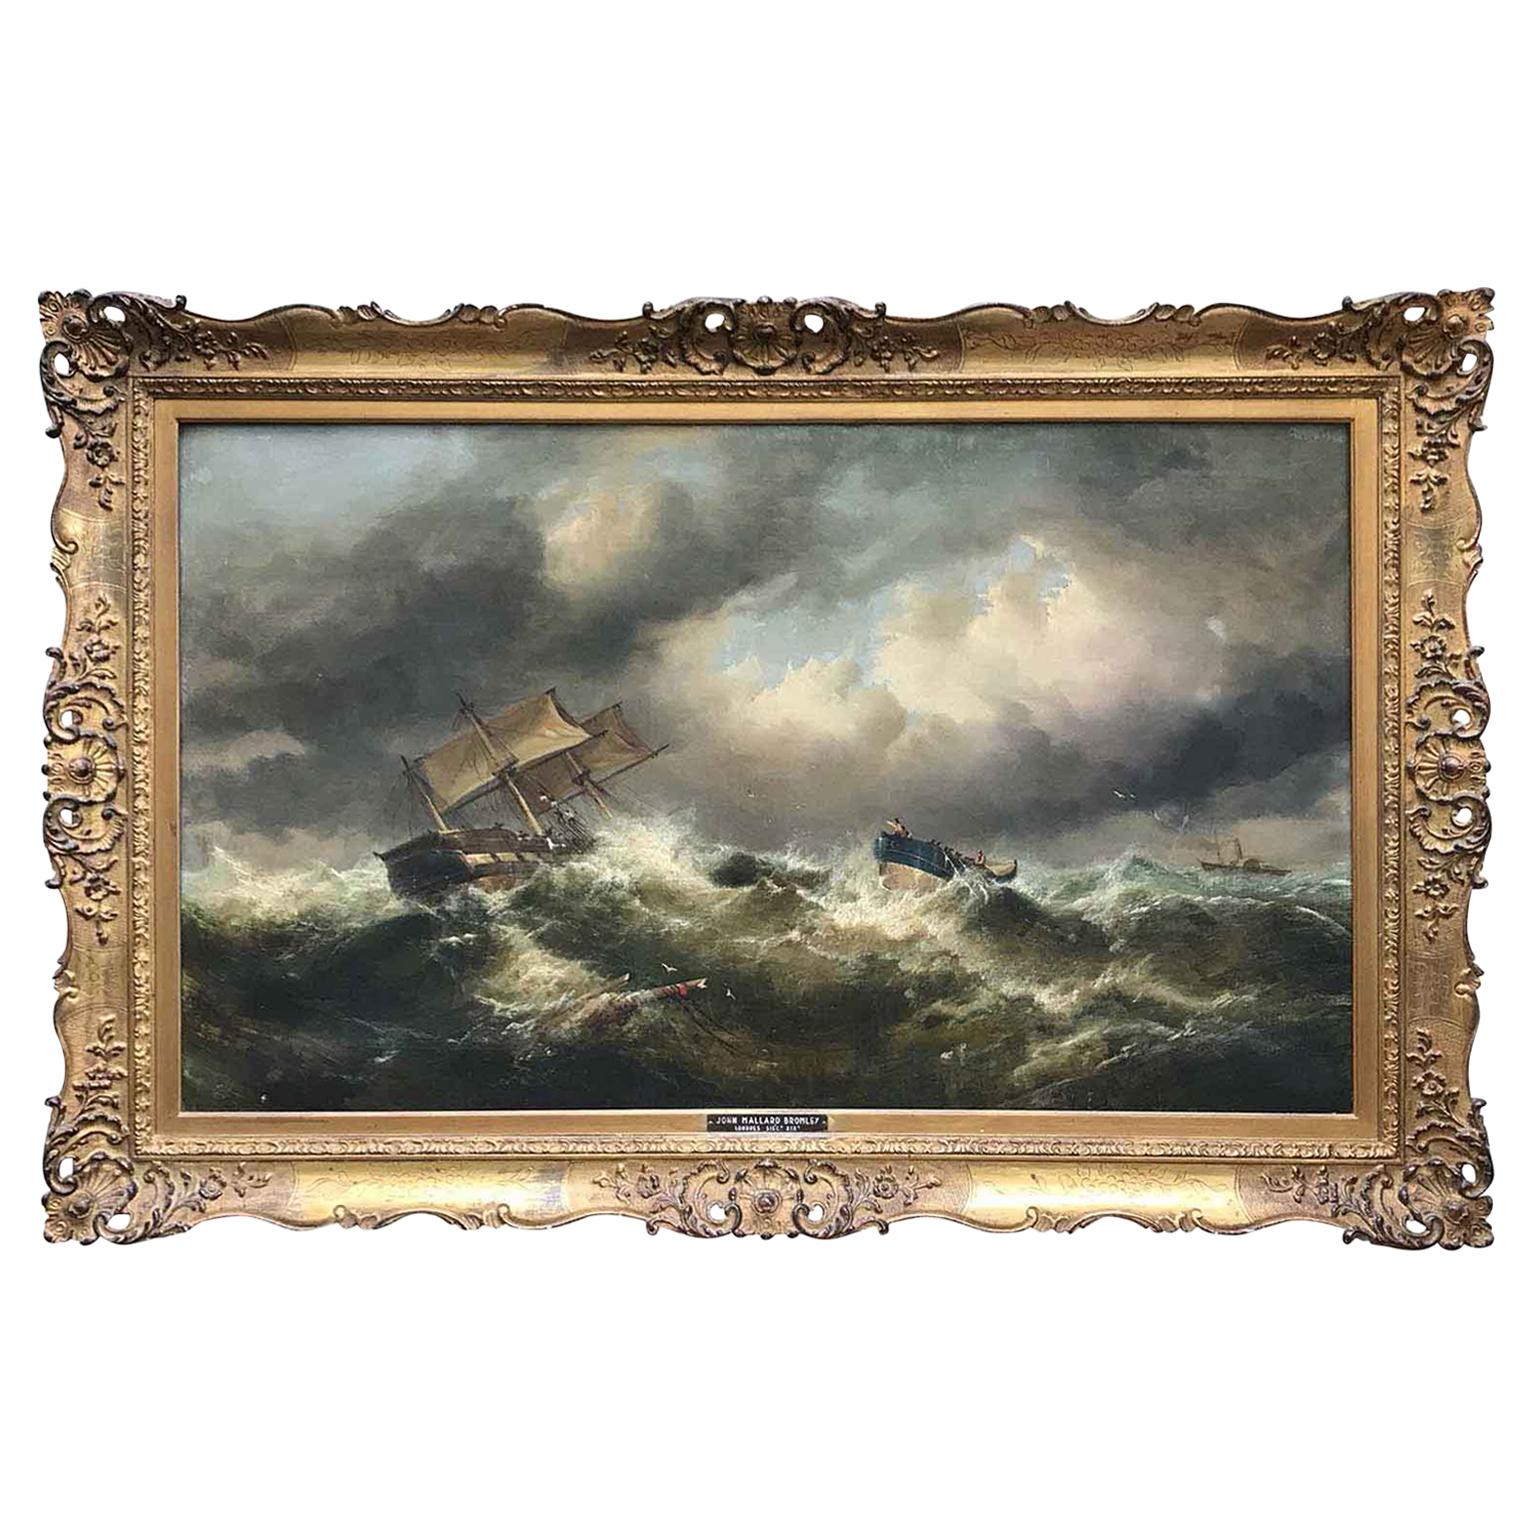 19th Century English Marine Painting Boats Stormy Sea by Bromley John Mallord